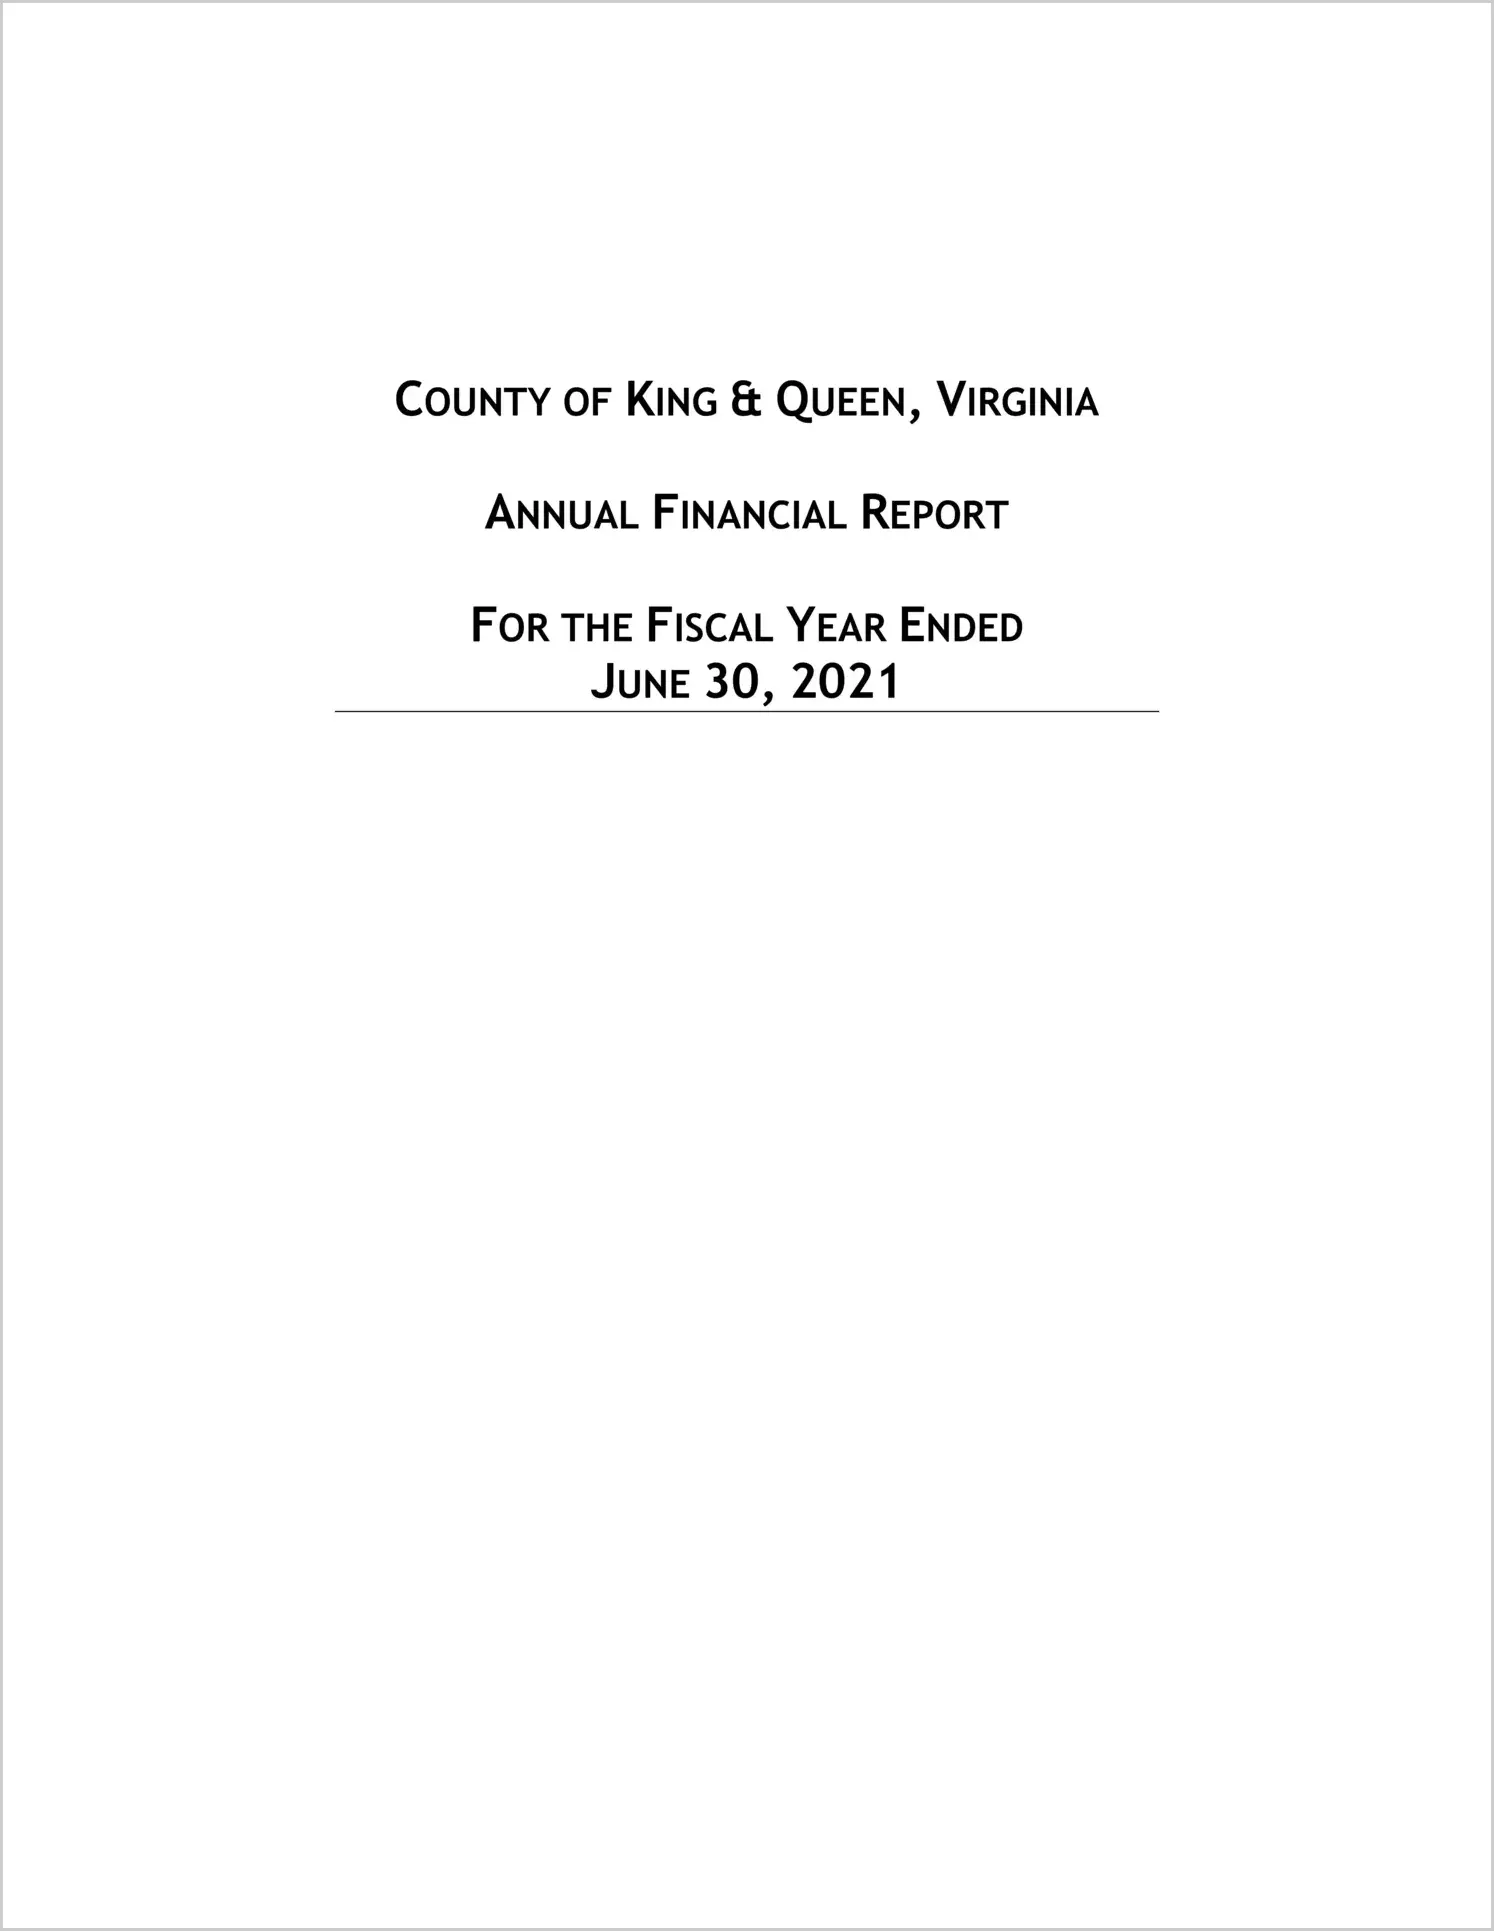 2021 Annual Financial Report for County of King and Queen